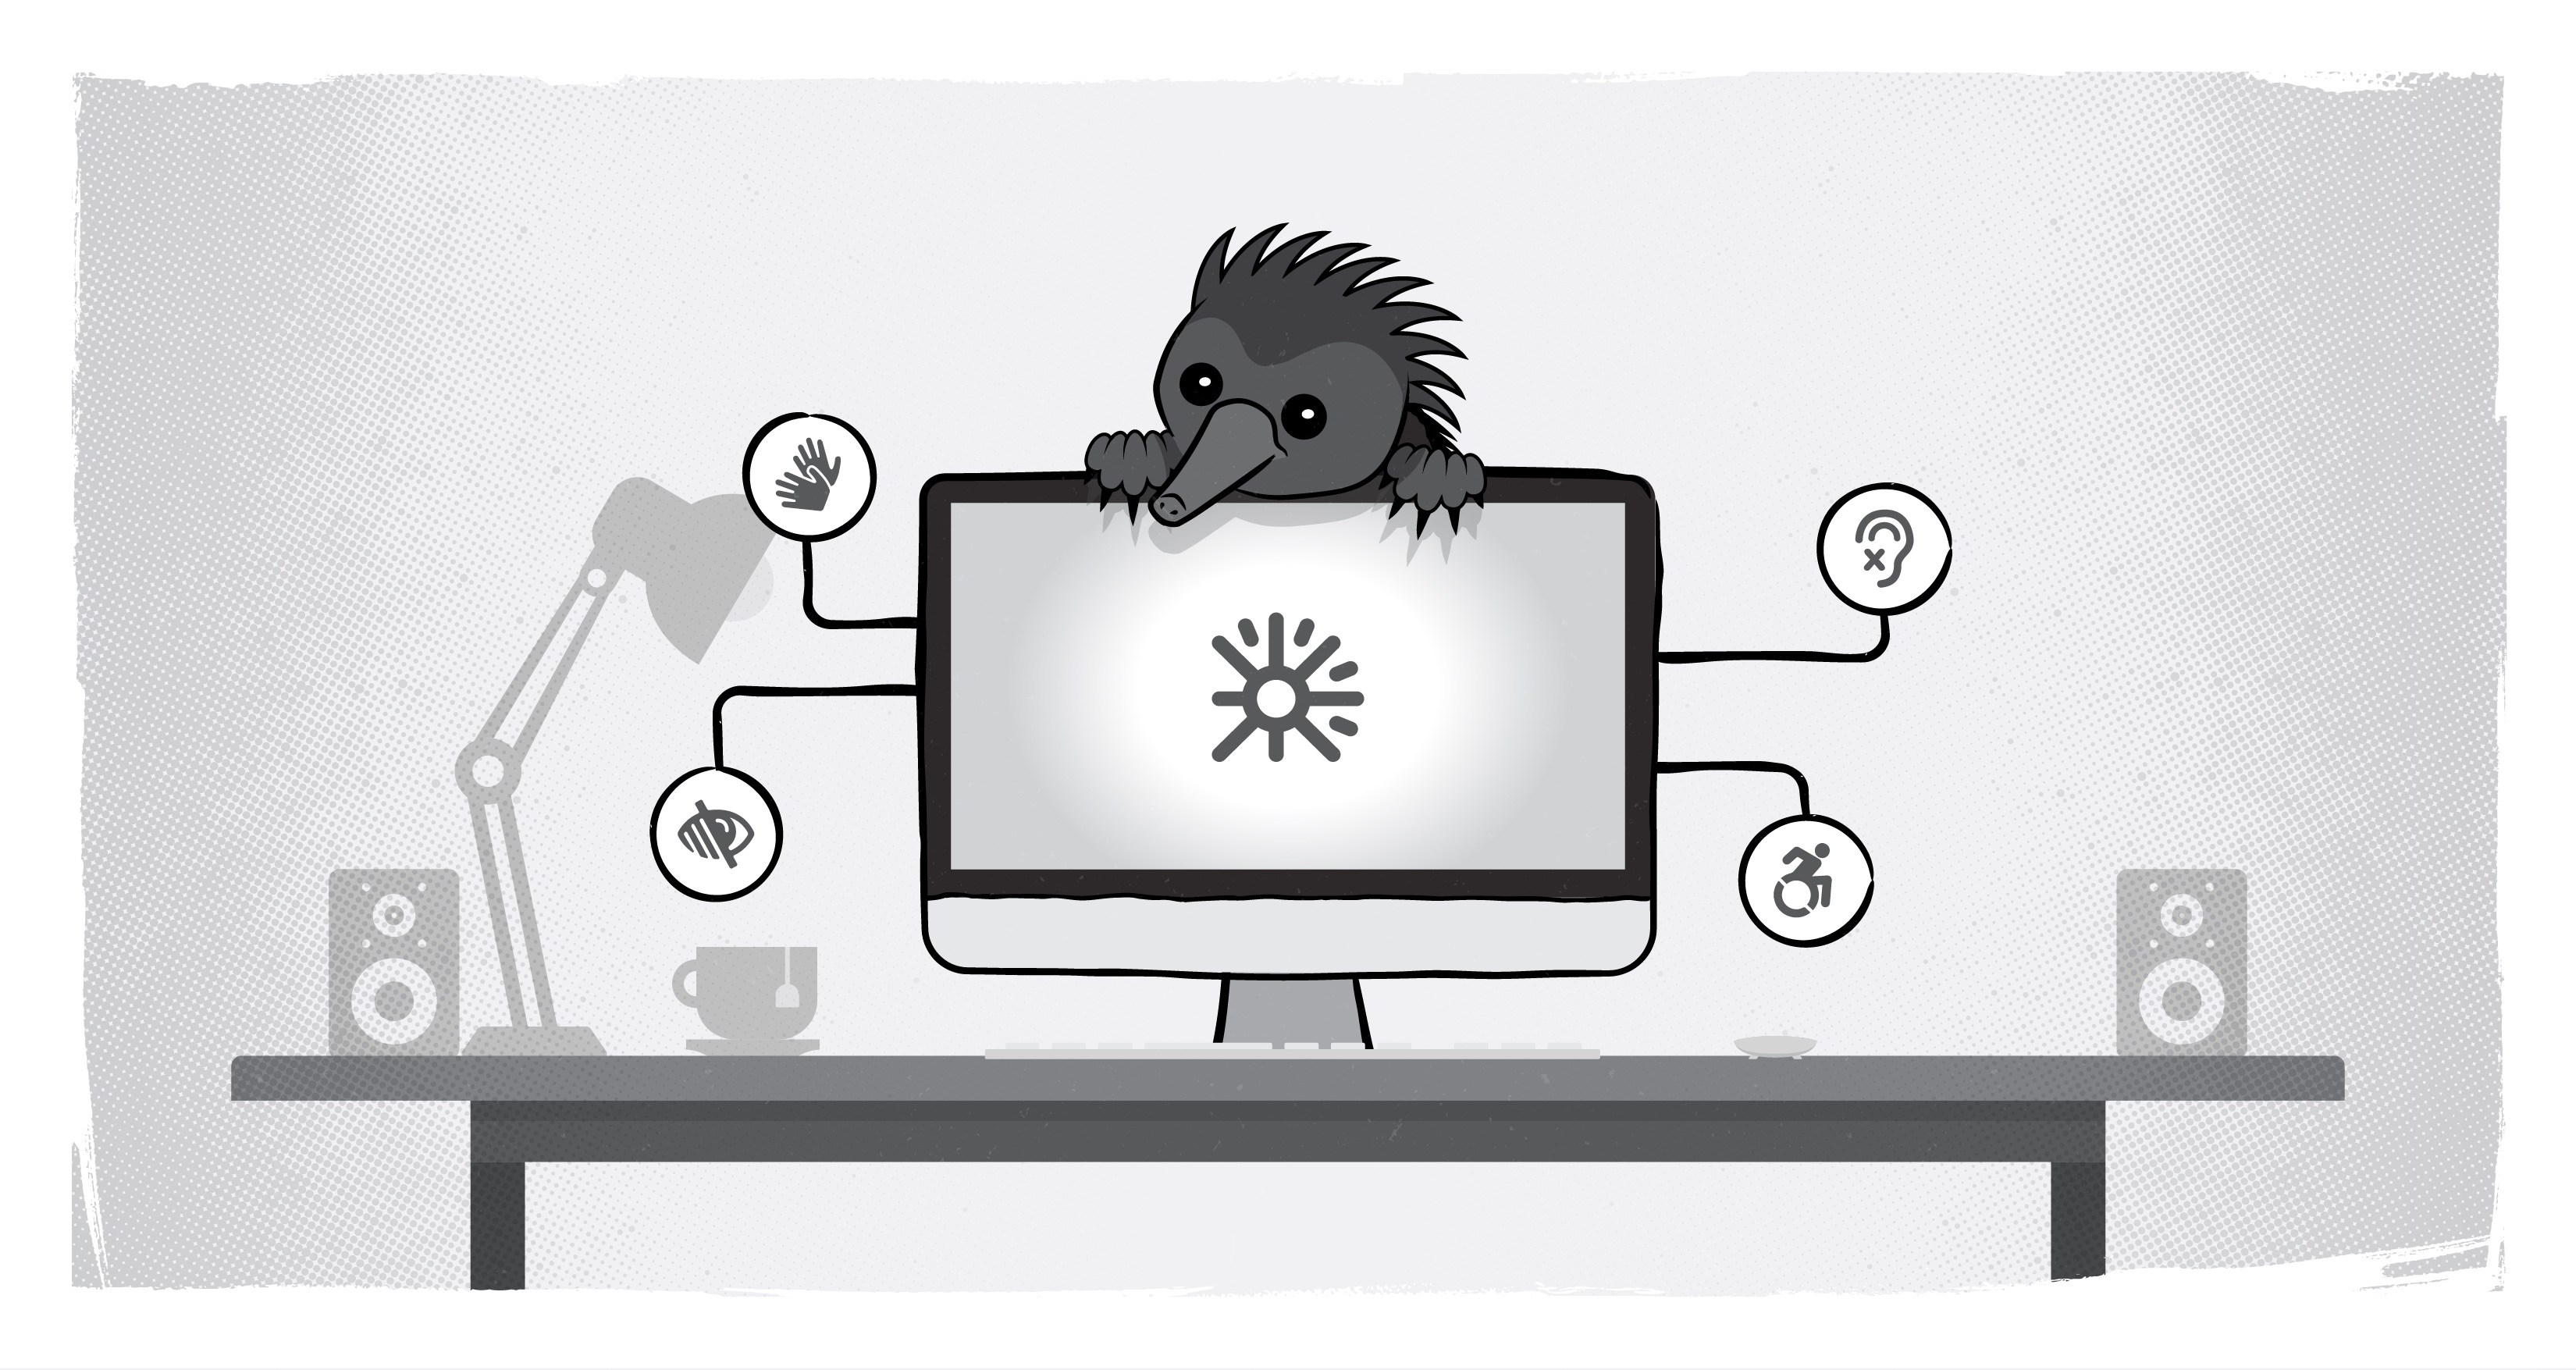 Echidna with computer and accessibility symbols